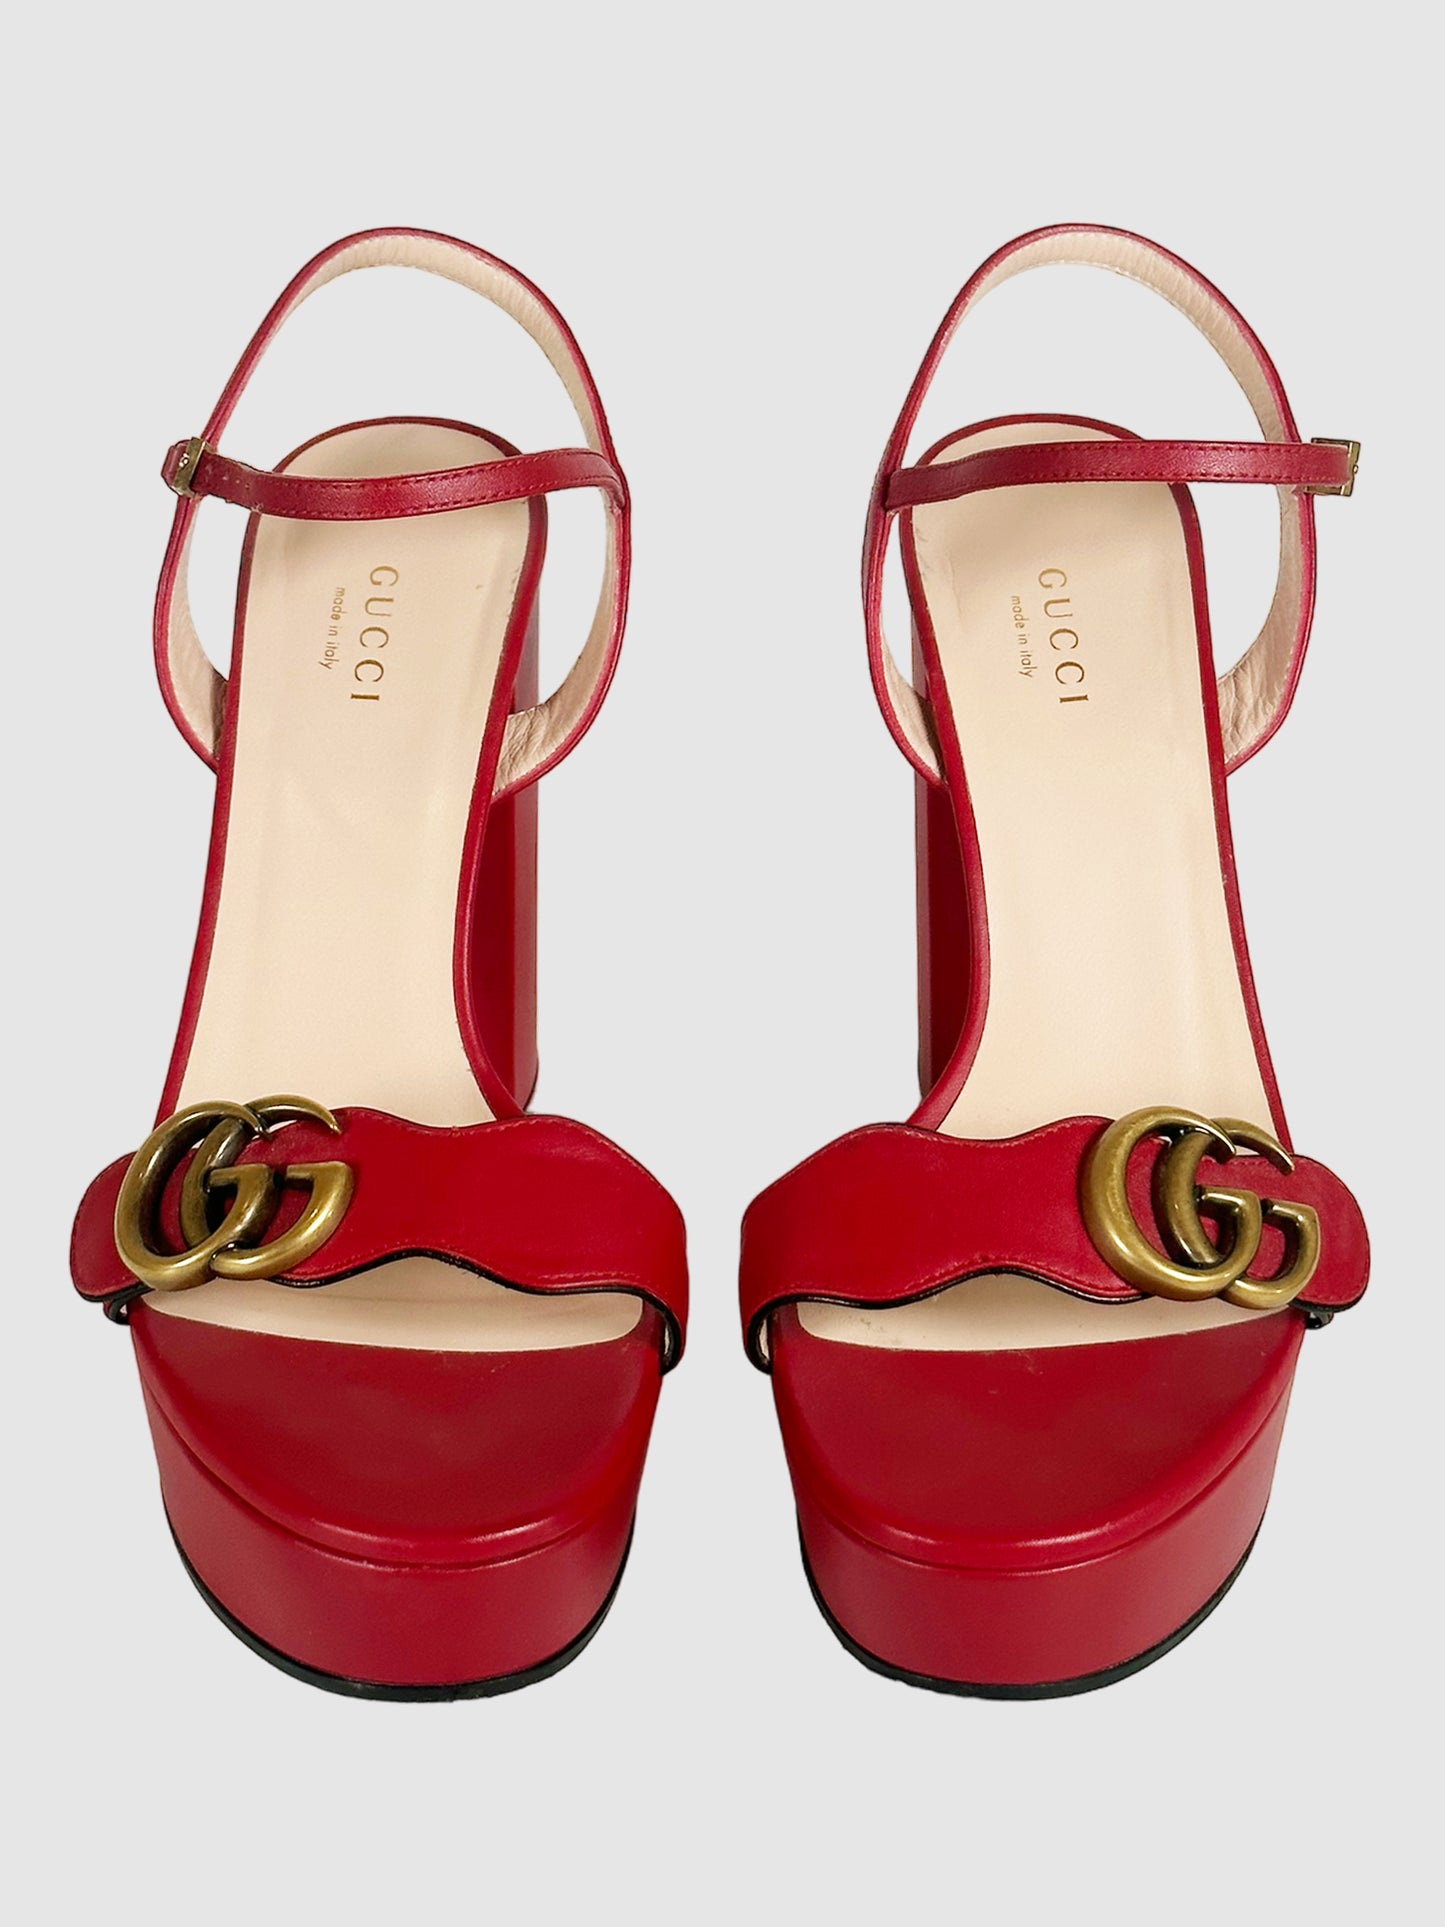 Gucci GG Marmont Leather Sandals - Size 38.5